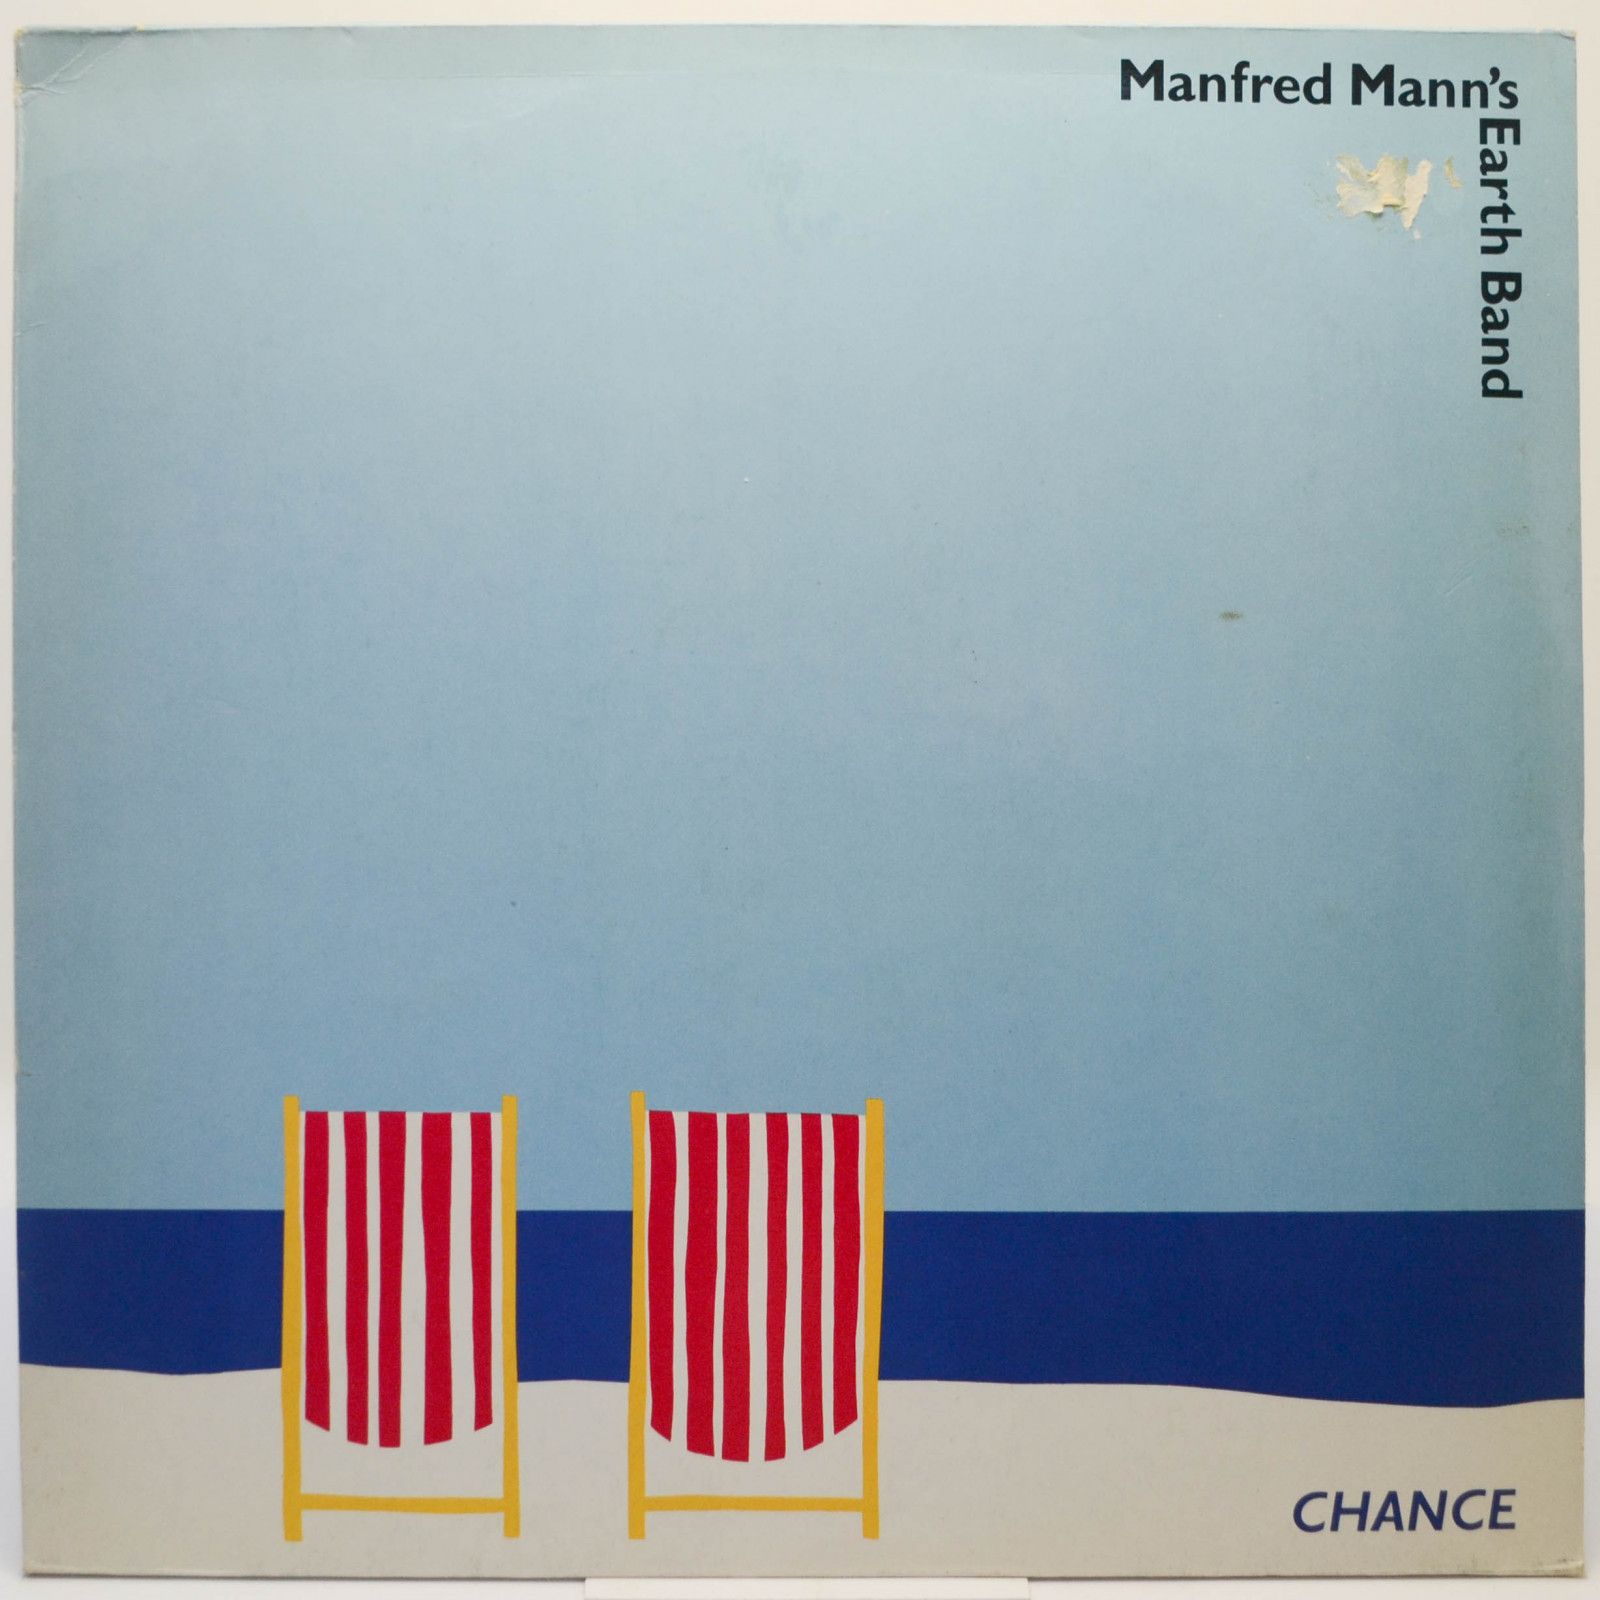 Manfred Mann's Earth Band — Chance, 1980